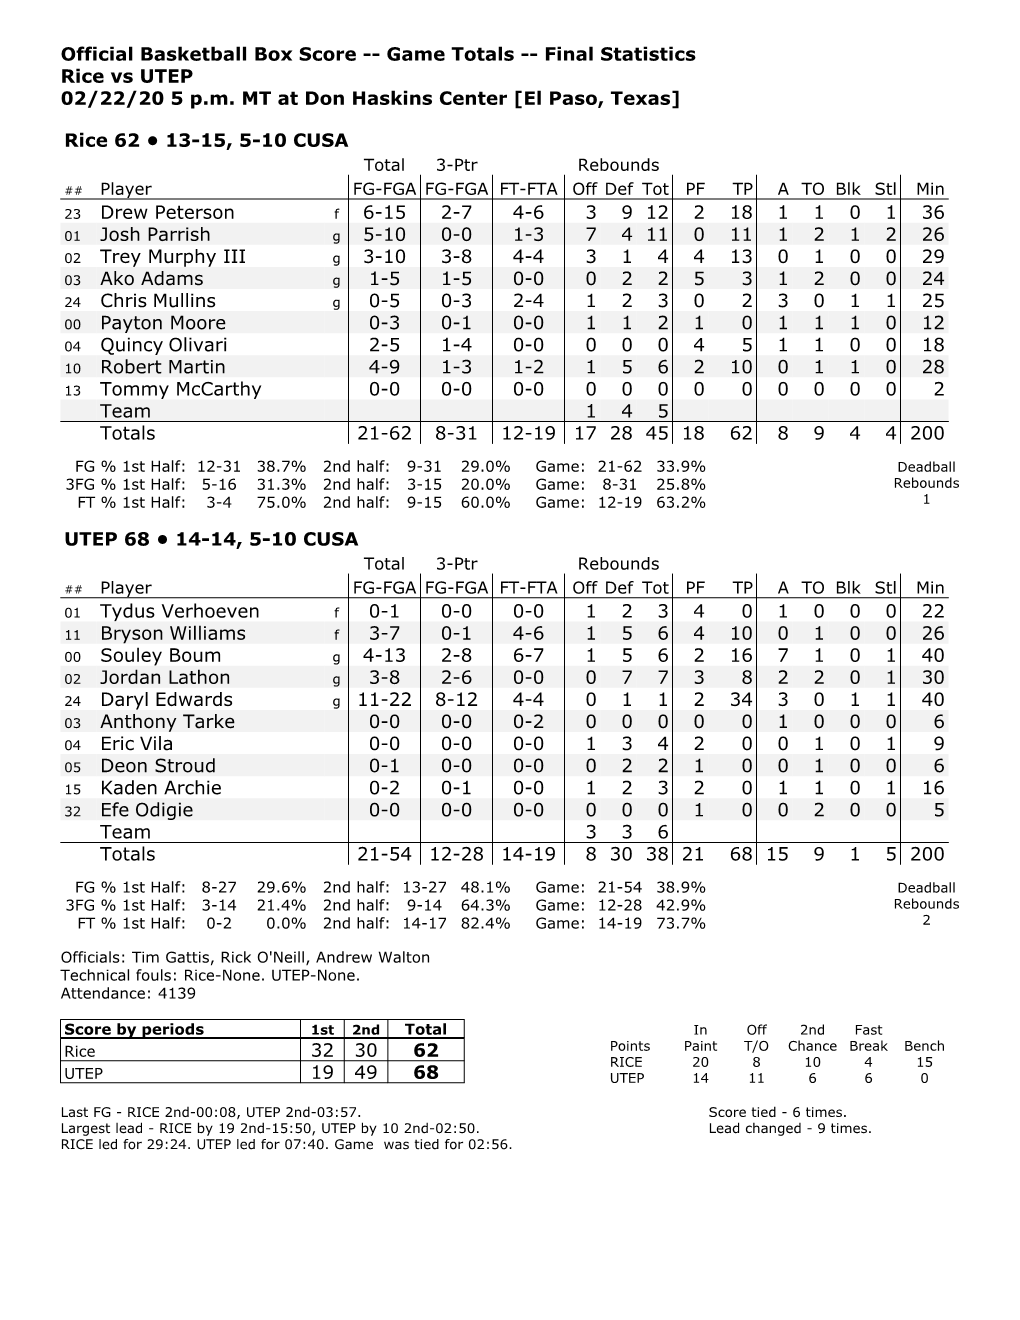 Official Basketball Box Score -- Game Totals -- Final Statistics Rice Vs UTEP 02/22/20 5 P.M